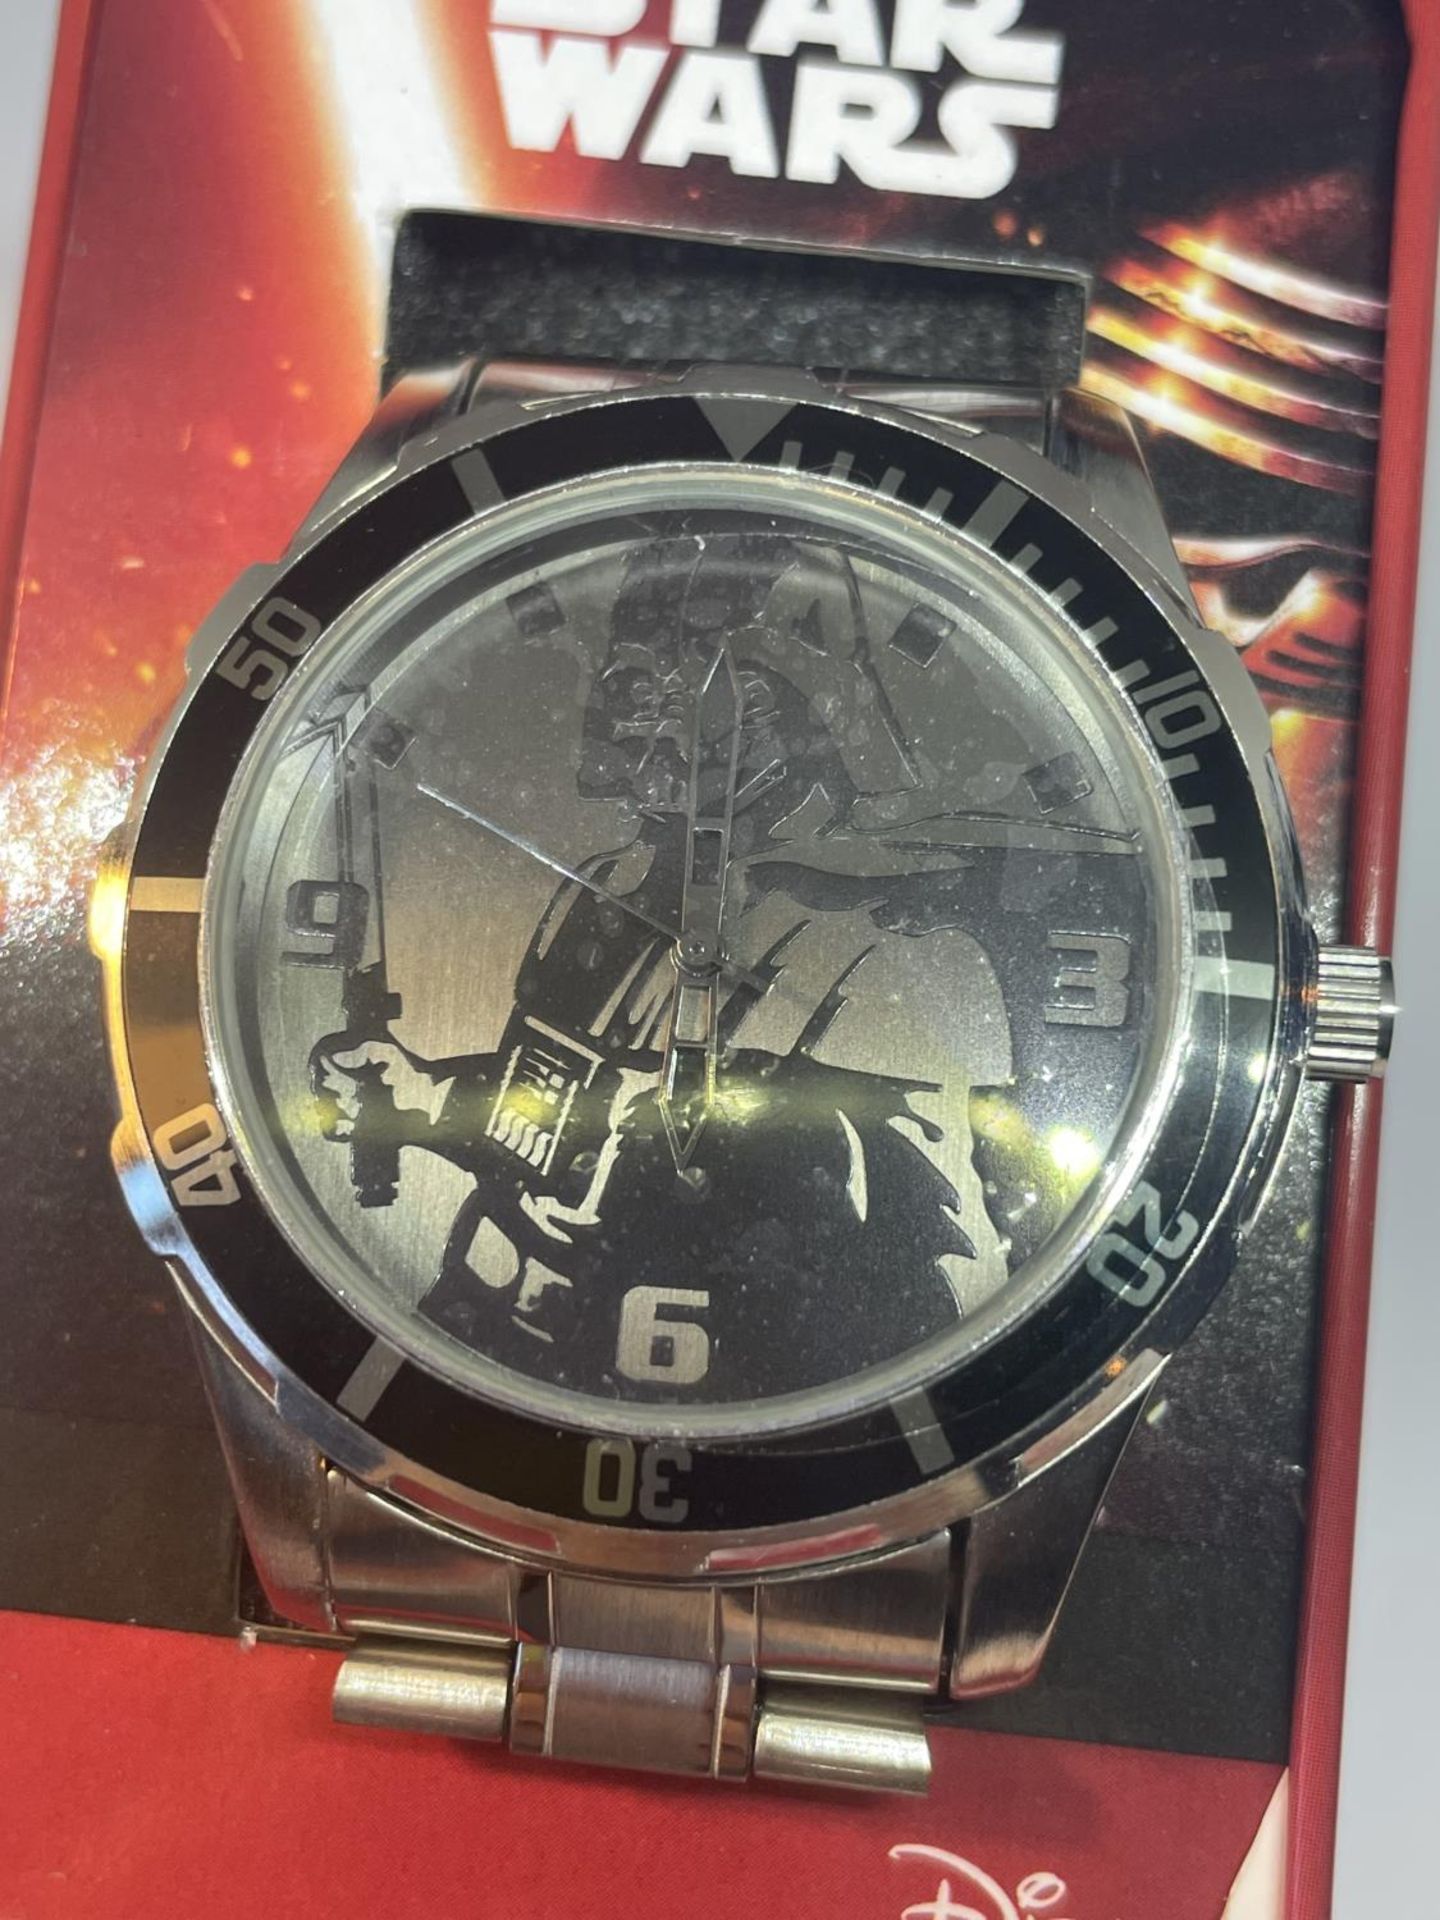 A STAR WARS WATCH IN A PRESENTATION TIN - Image 2 of 3